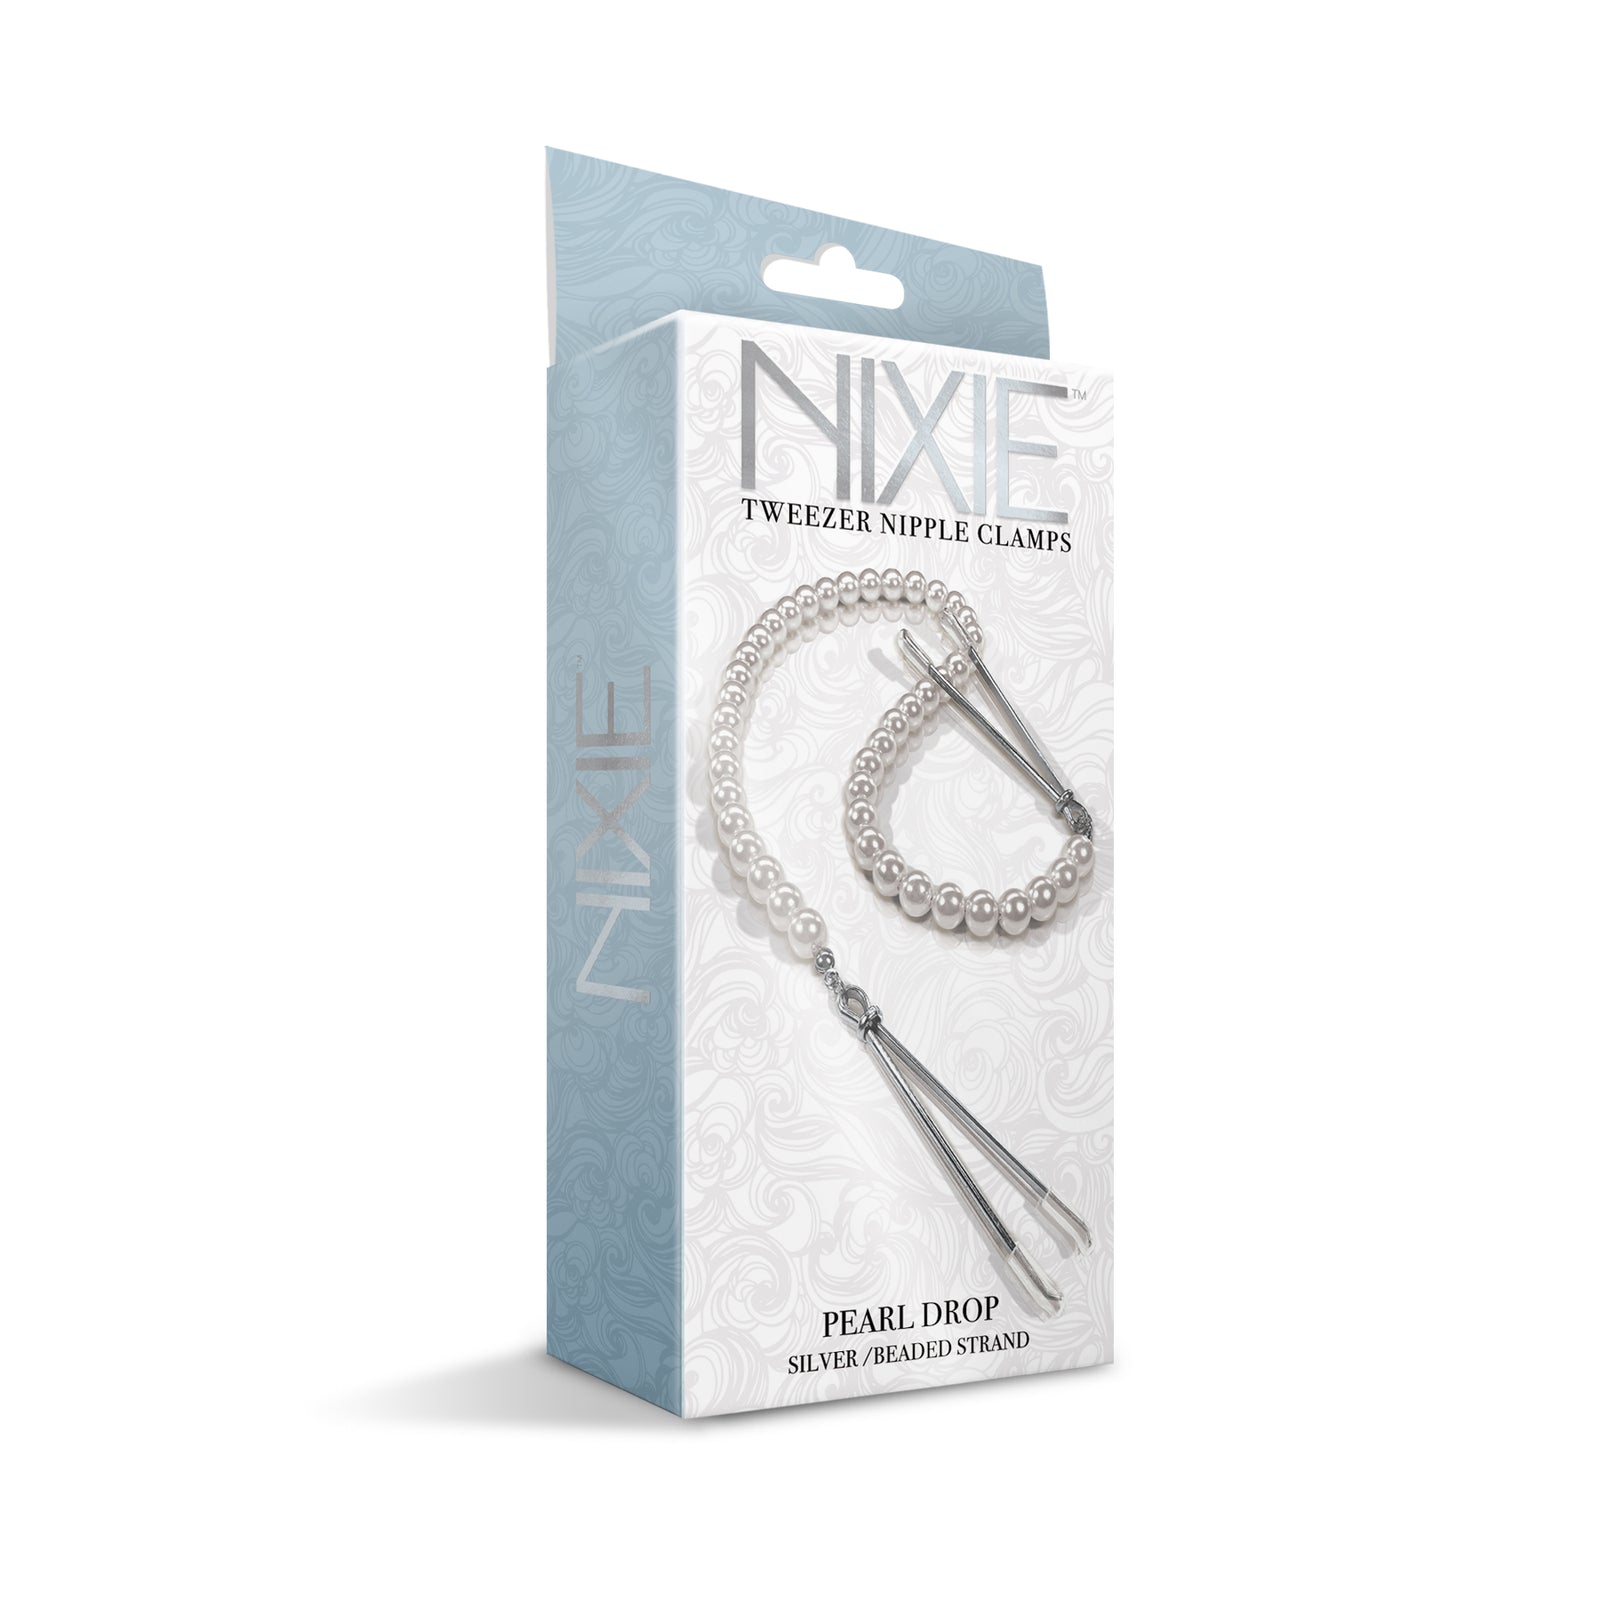 NIXIE Pearl Drop Tweezer Nipple Clamps, White Gold - THES